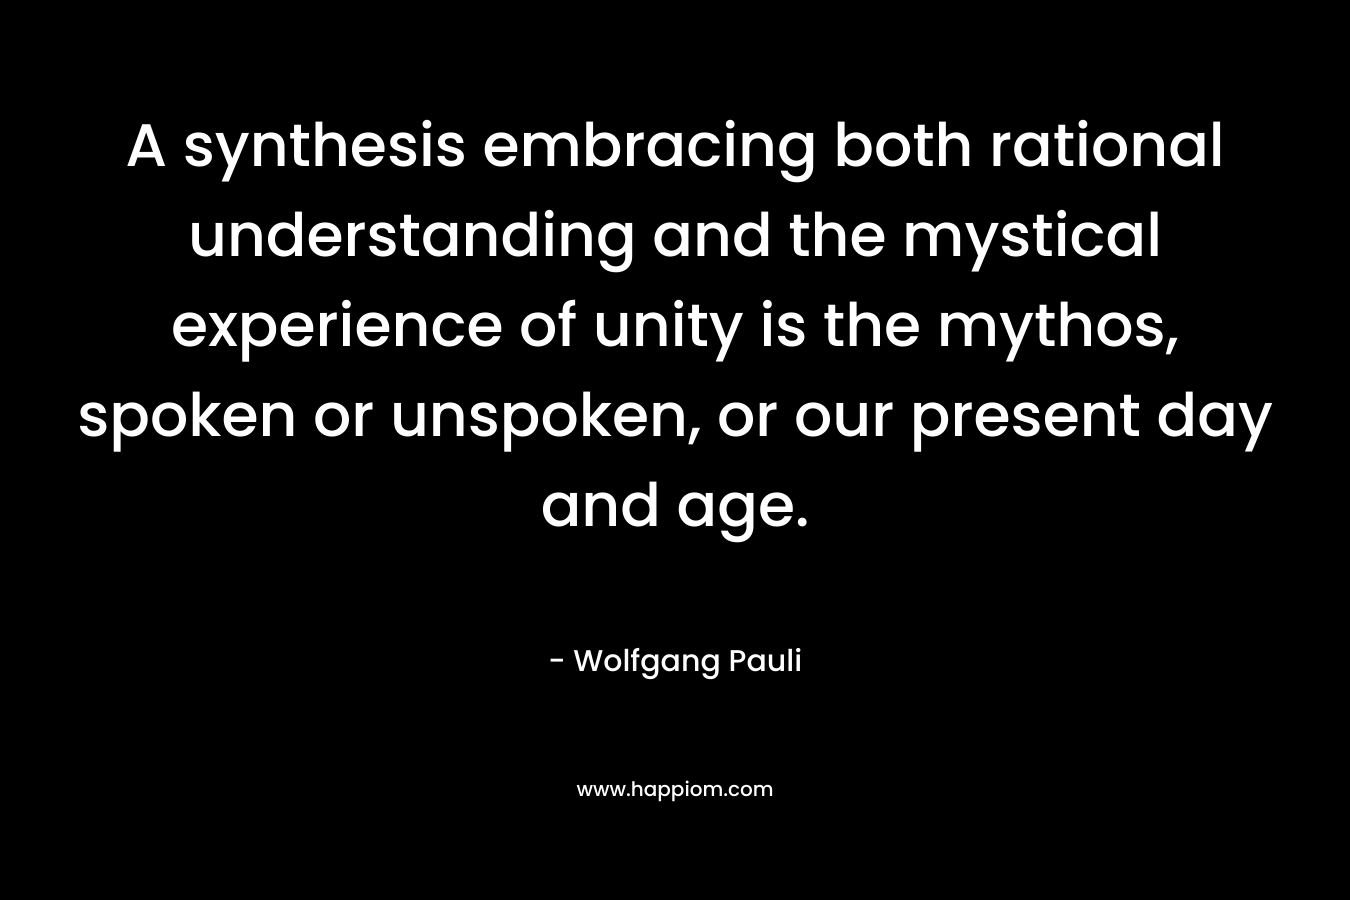 A synthesis embracing both rational understanding and the mystical experience of unity is the mythos, spoken or unspoken, or our present day and age.